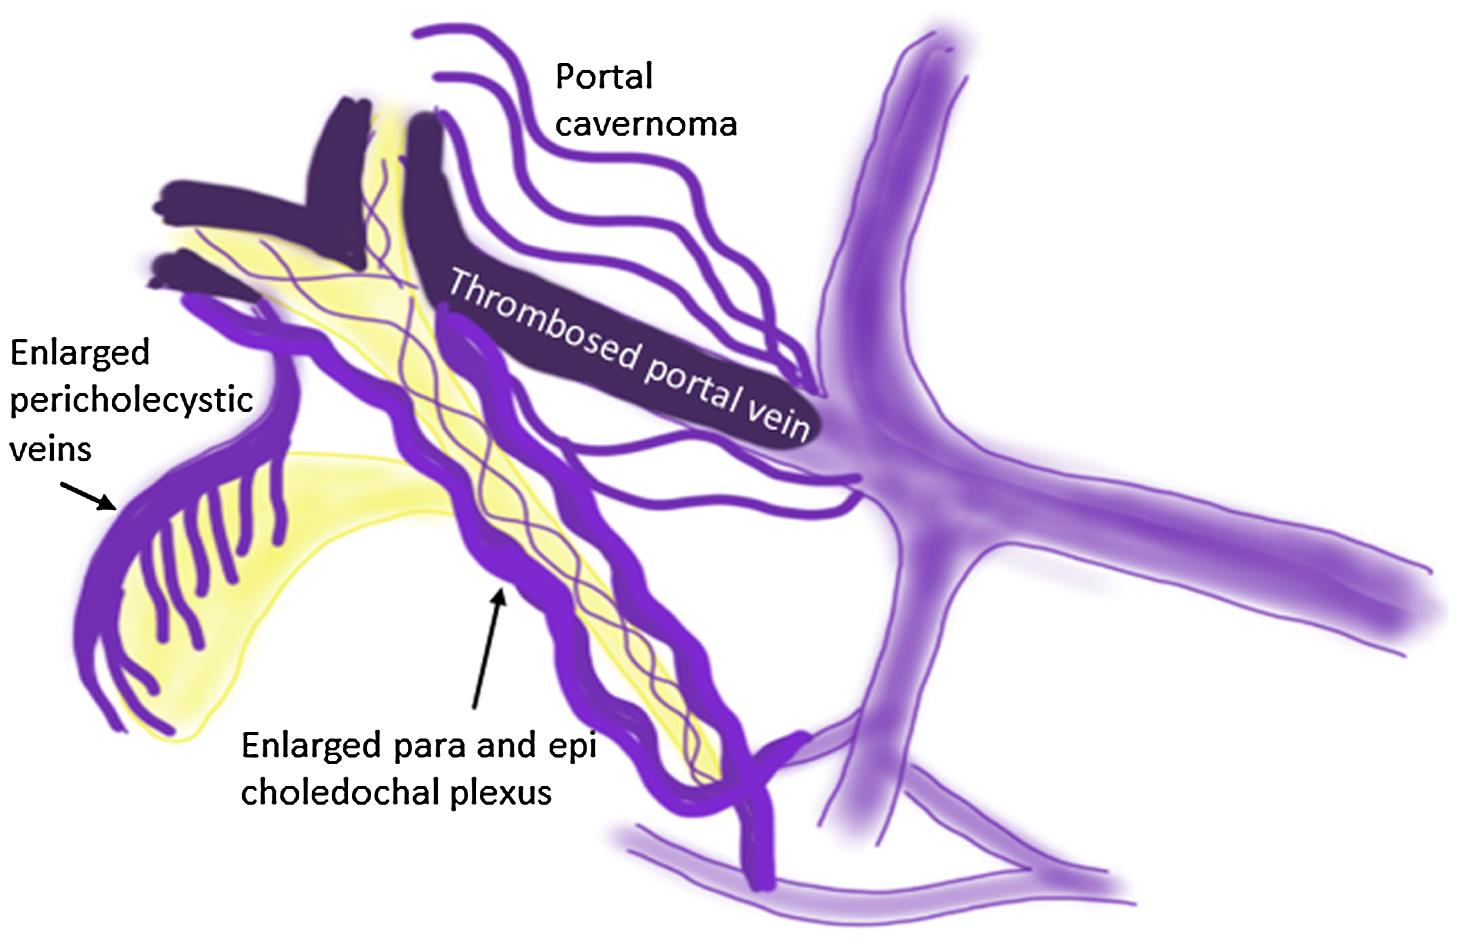 Enlargement of peribiliary collaterals and development of cholangiopathy after portal vein thrombosis.